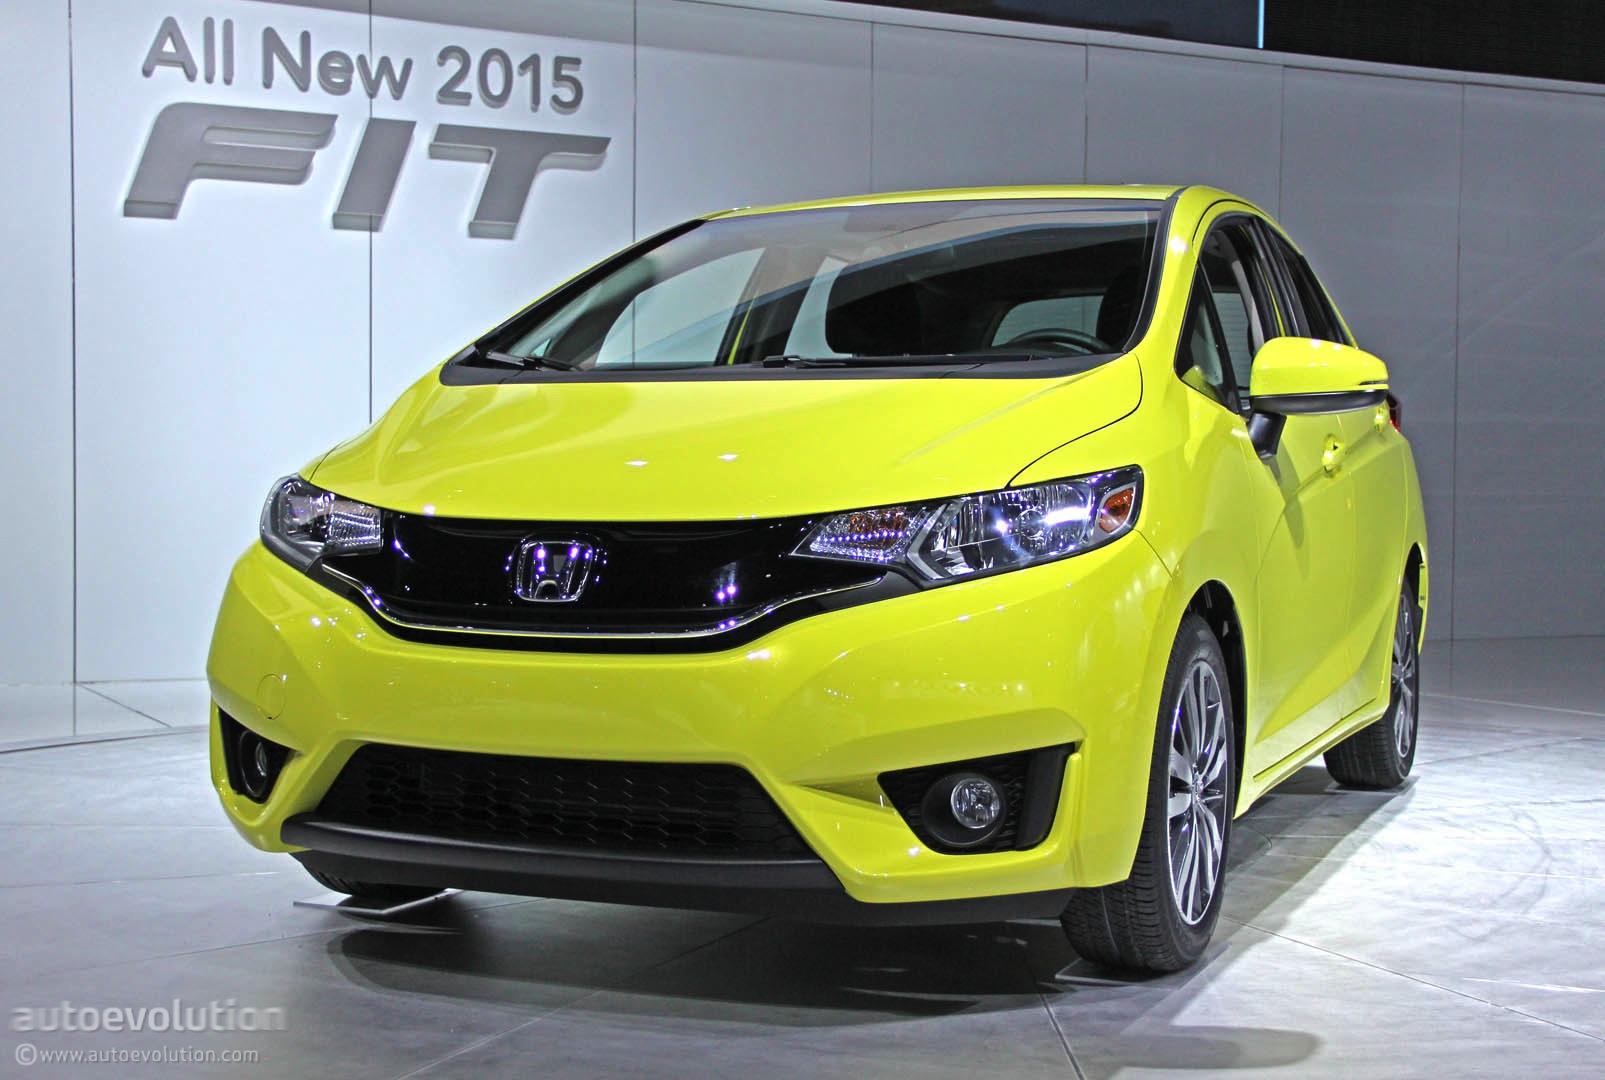 2015 Honda Fit Is a Cool New Urban Car for $15,525